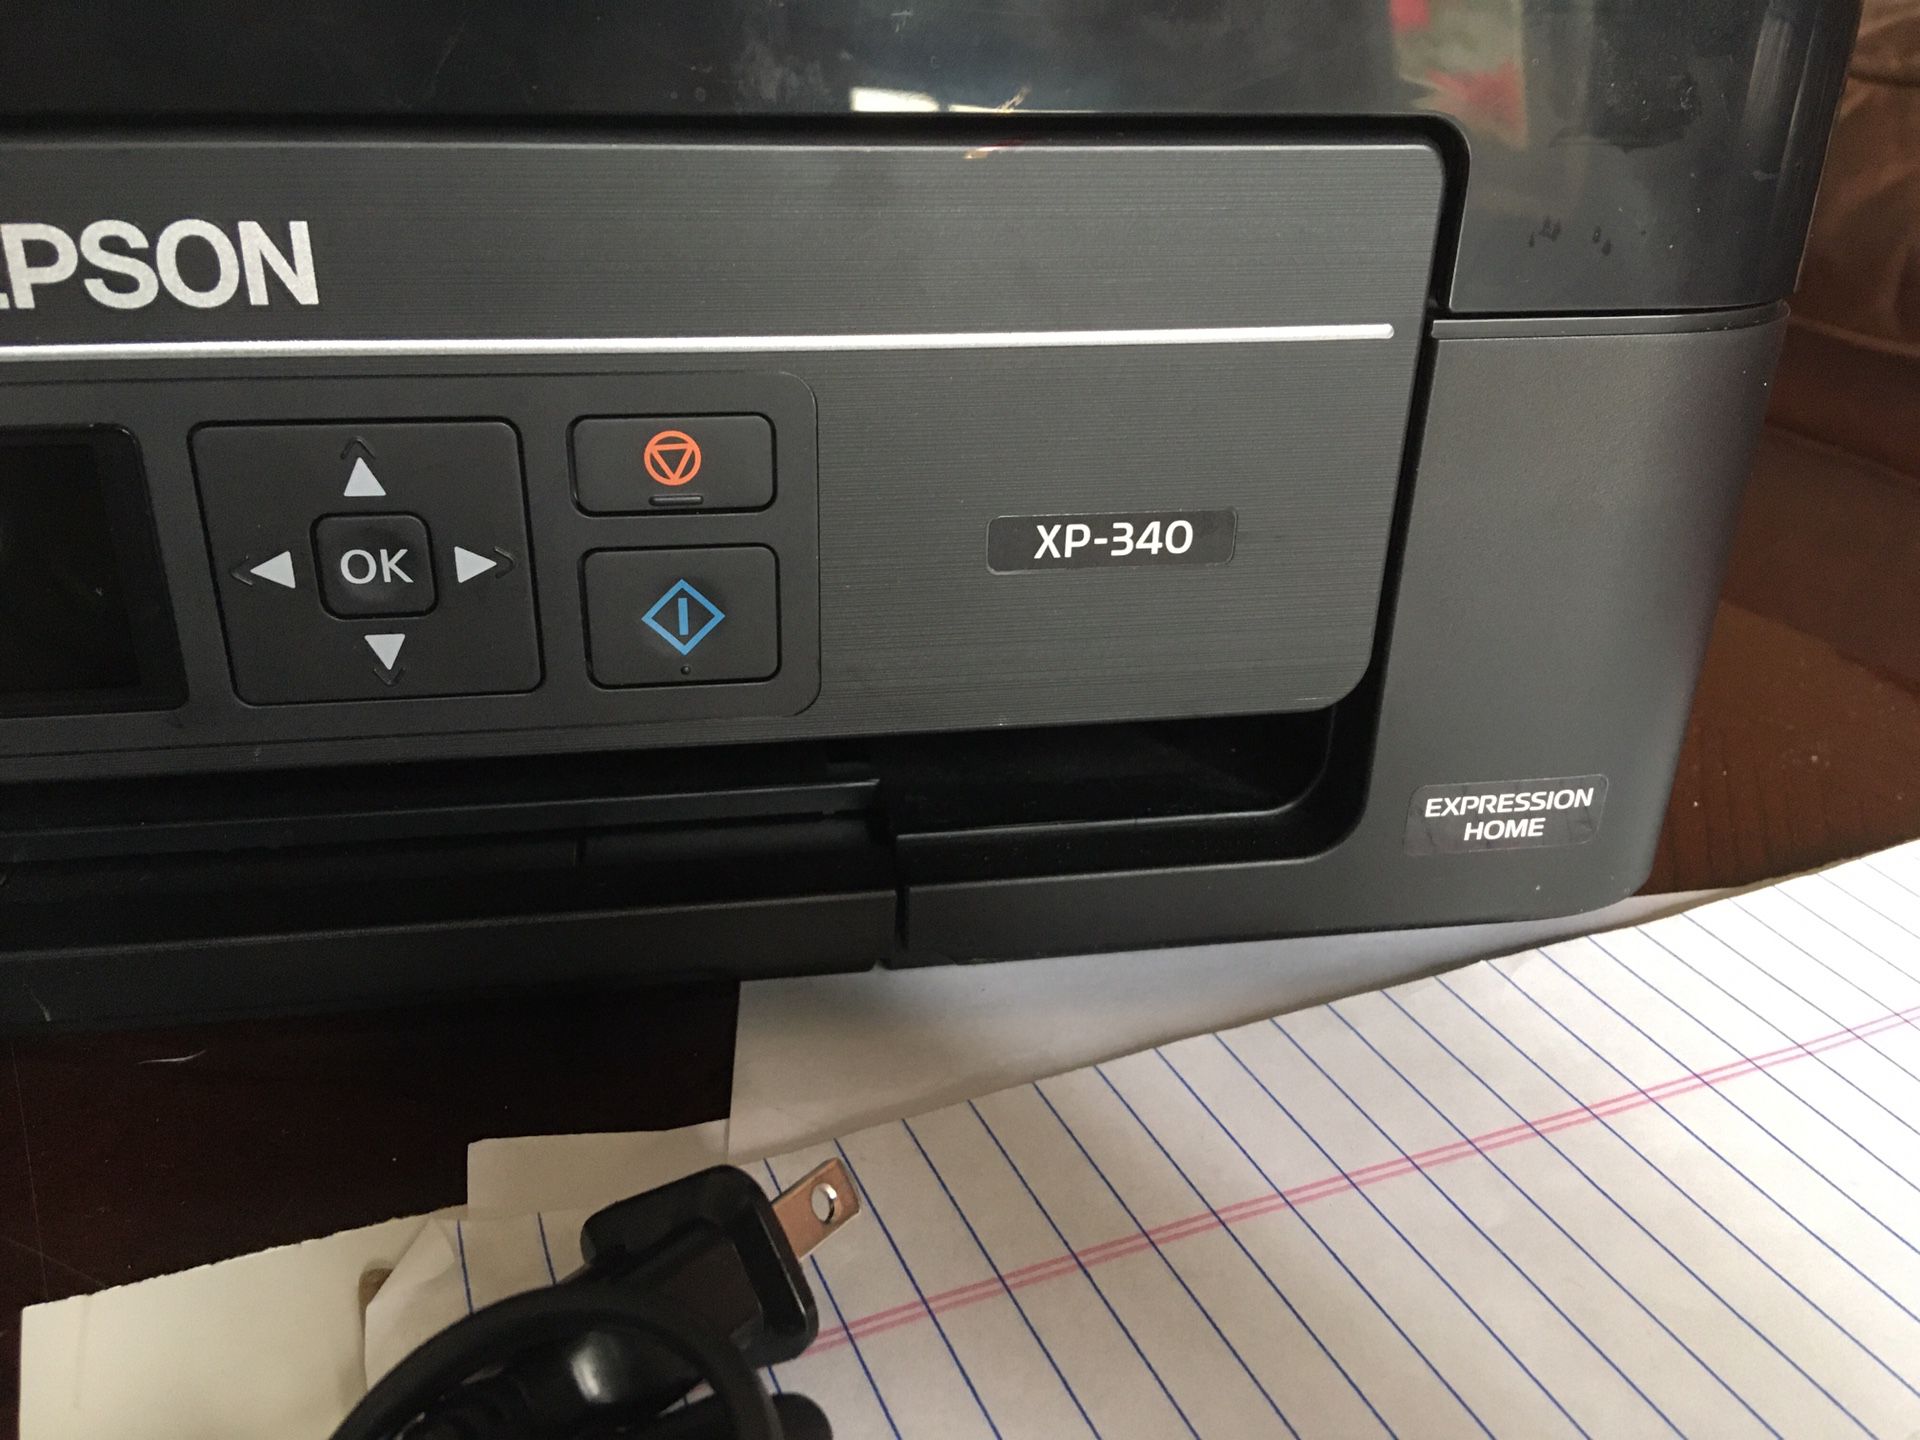 Epson printer with ink